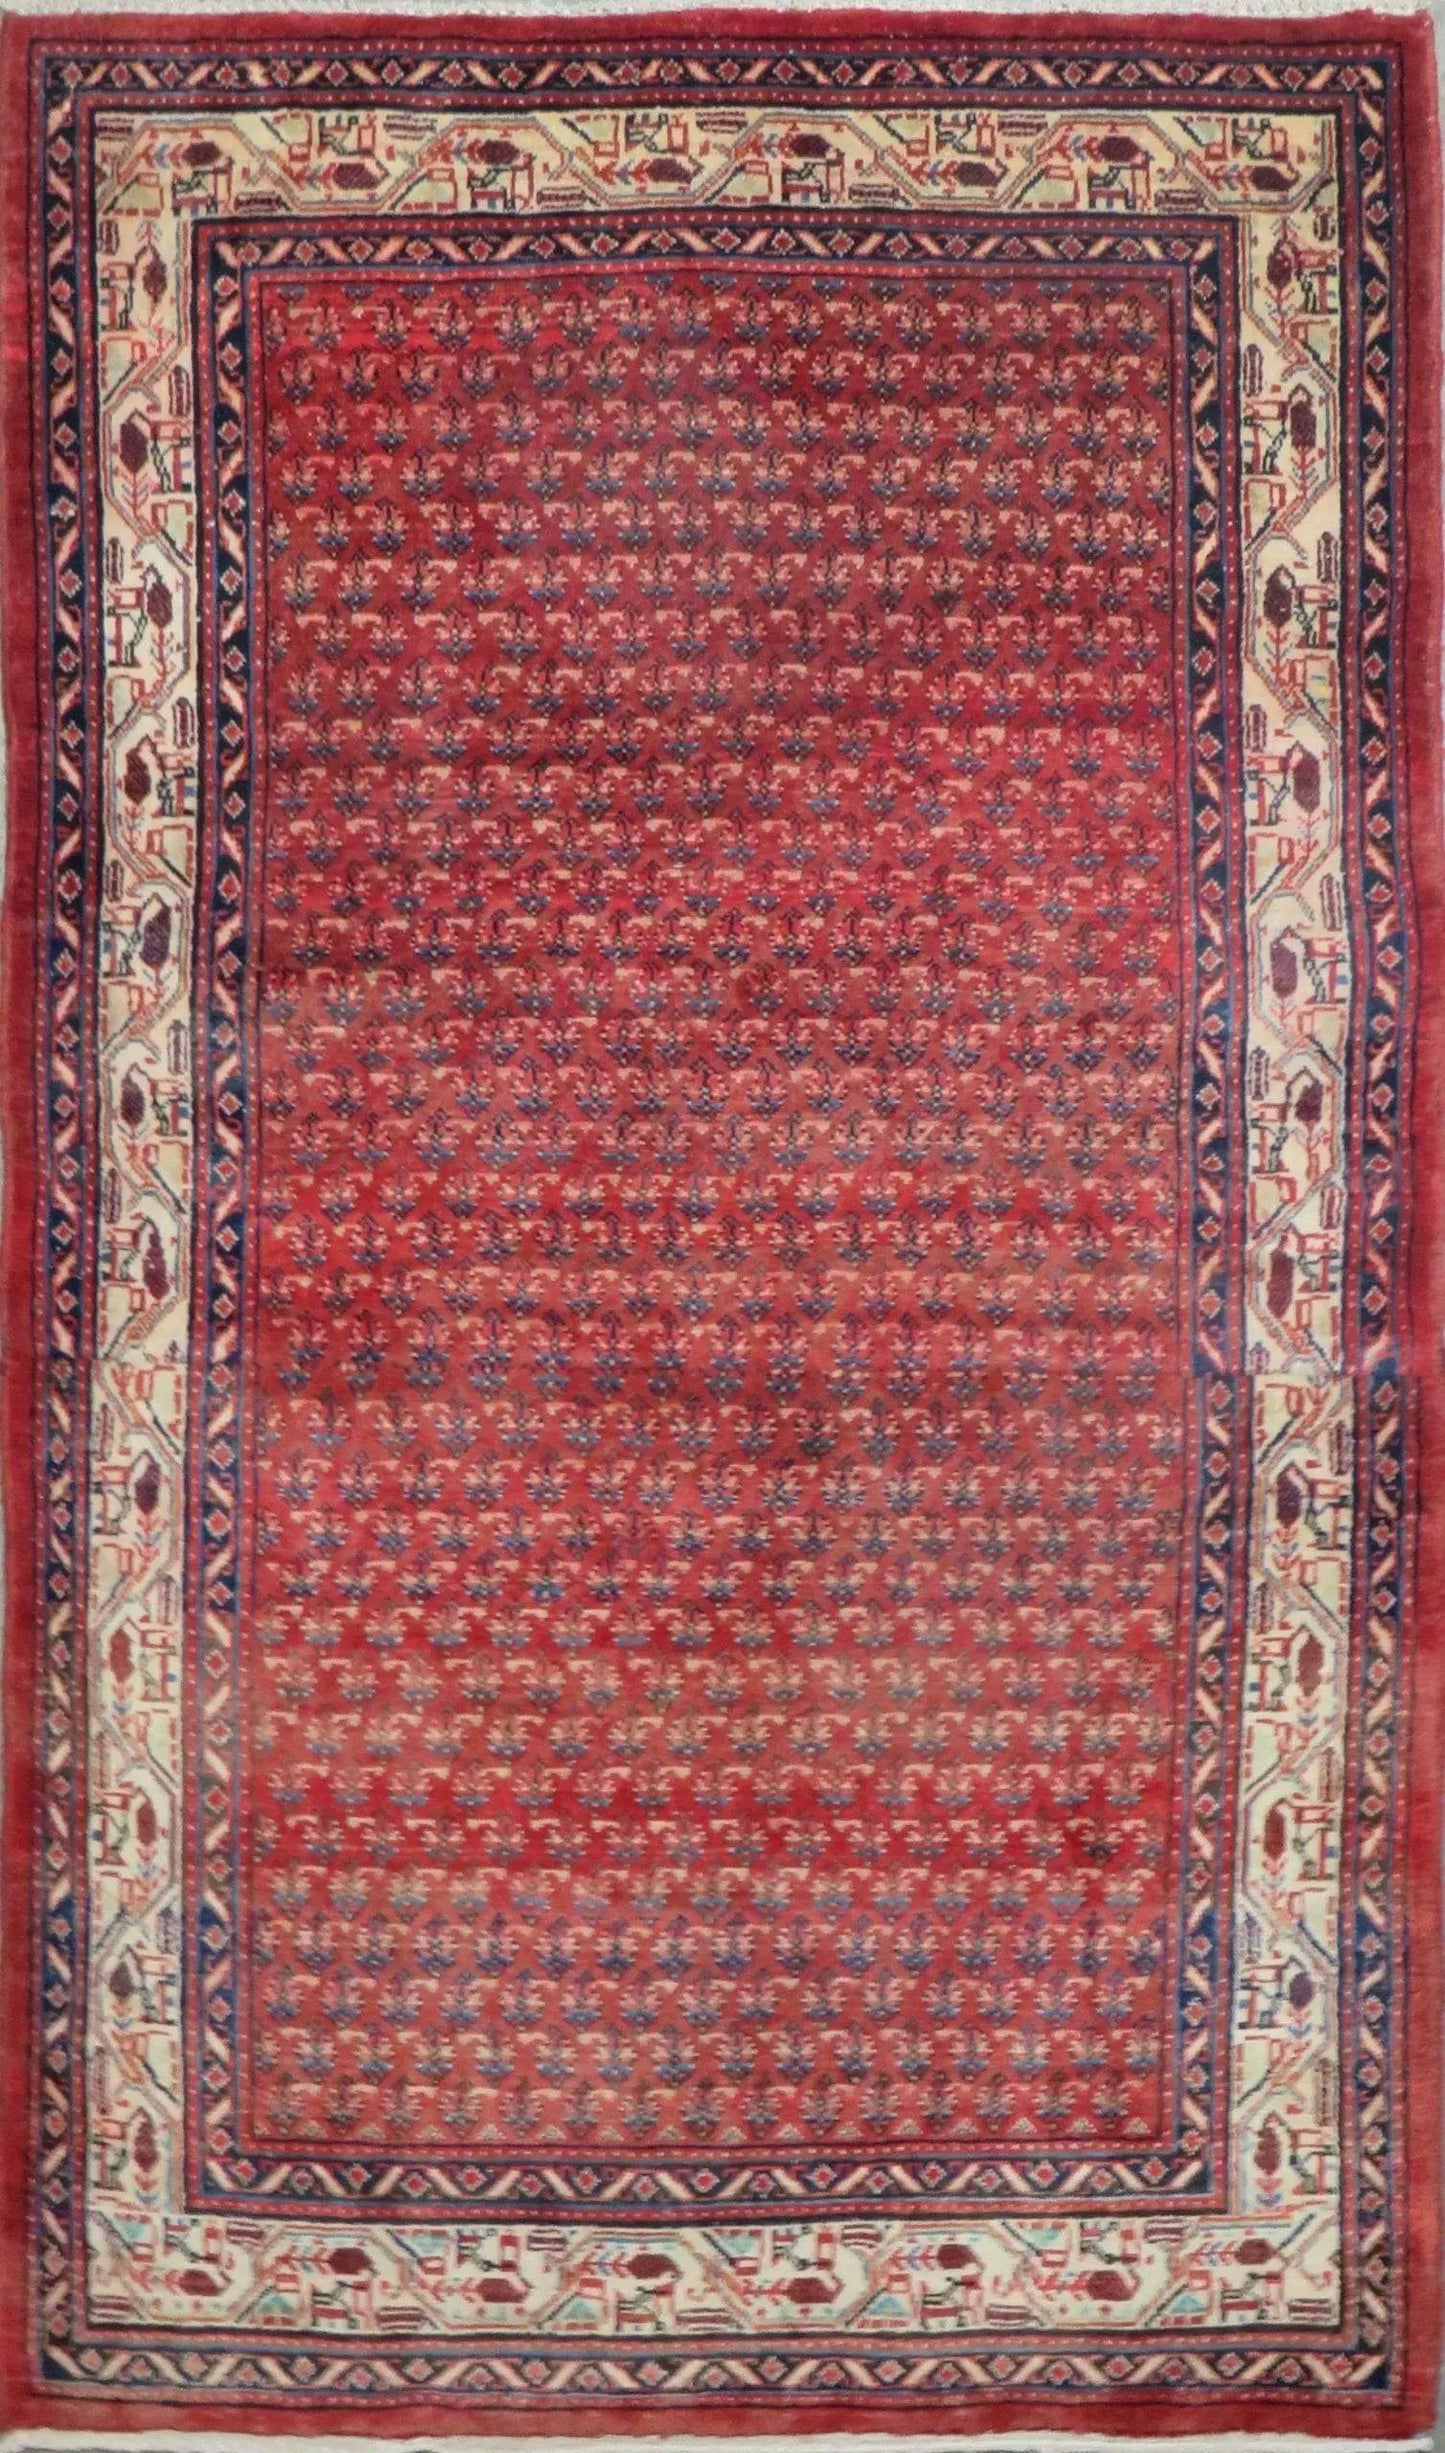 Hand-Knotted Vintage Rug 7'4" x 4'6"